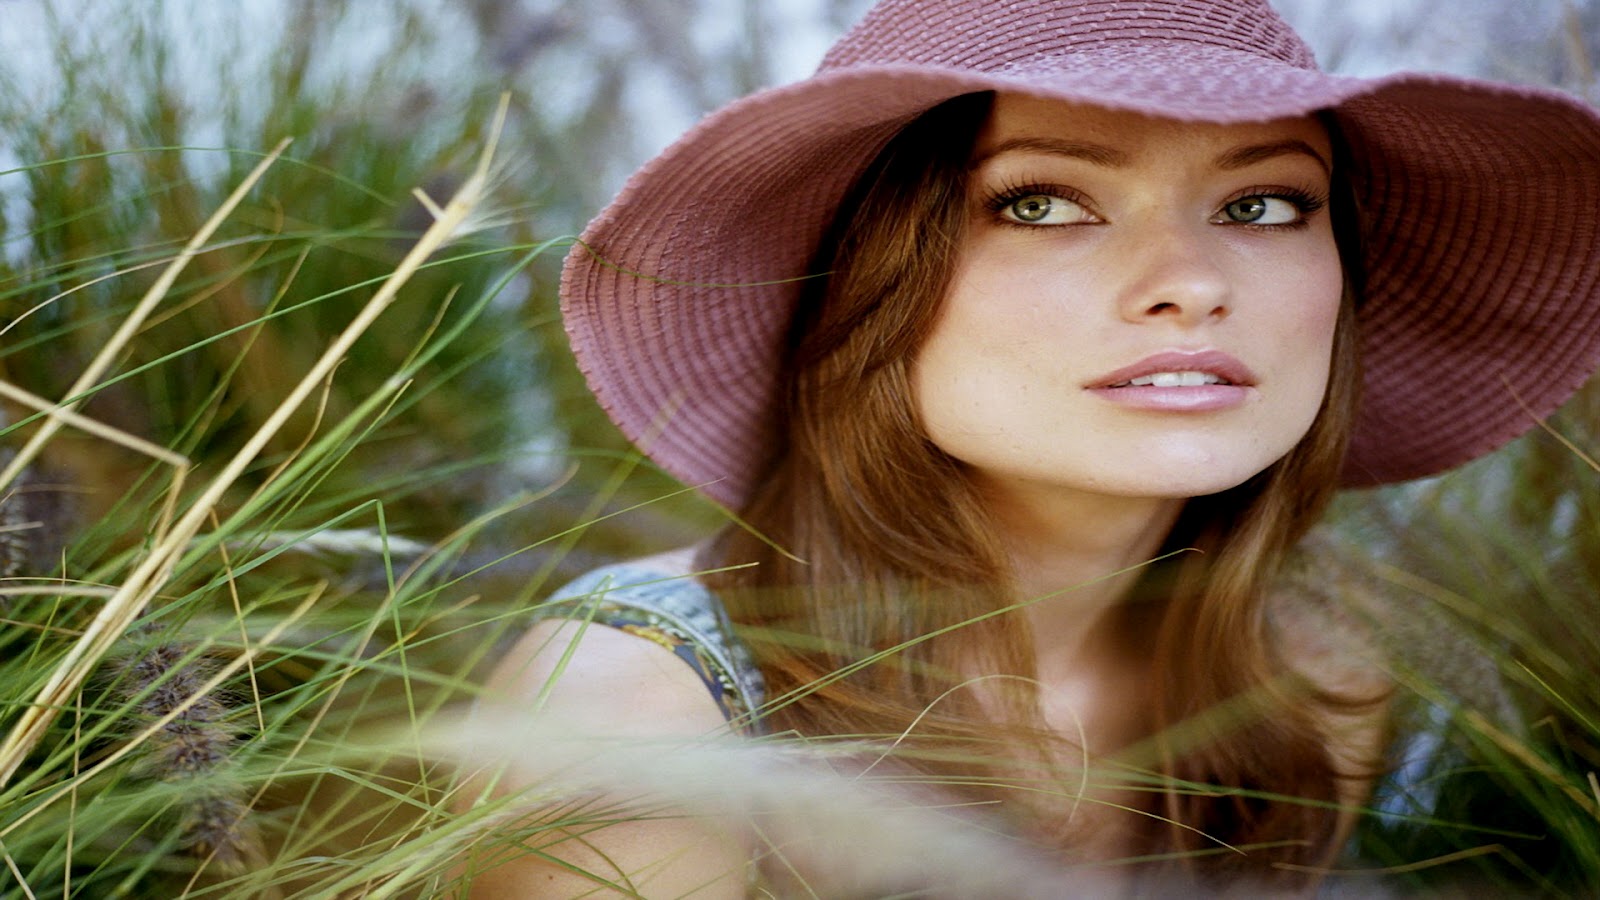 all new pix1 1080p Wallpapers Olivia Wilde